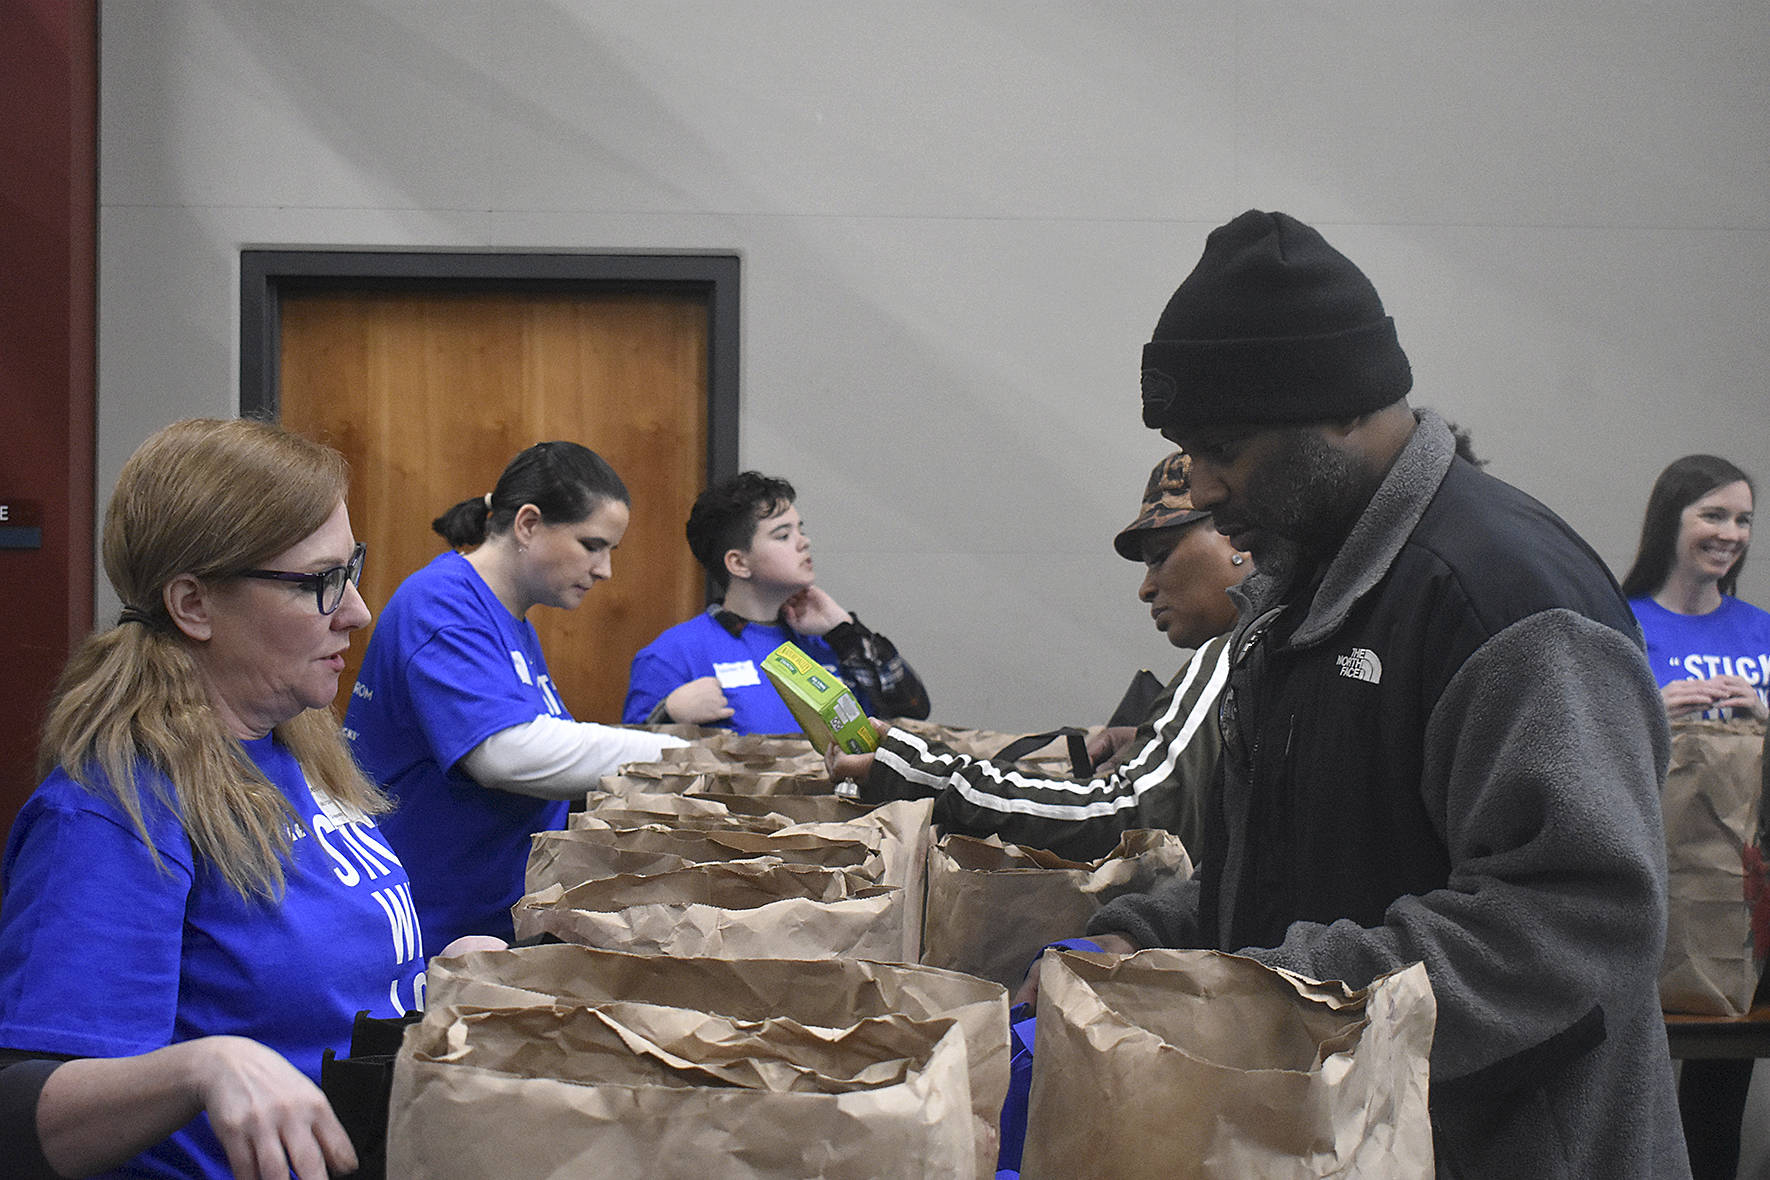 Photo by Haley Ausbun. United Way provided groceries and other donated goods at the Family Resource Exchange event on Martin Luther King Jr. Day, Jan. 20 at Lindbergh High School.